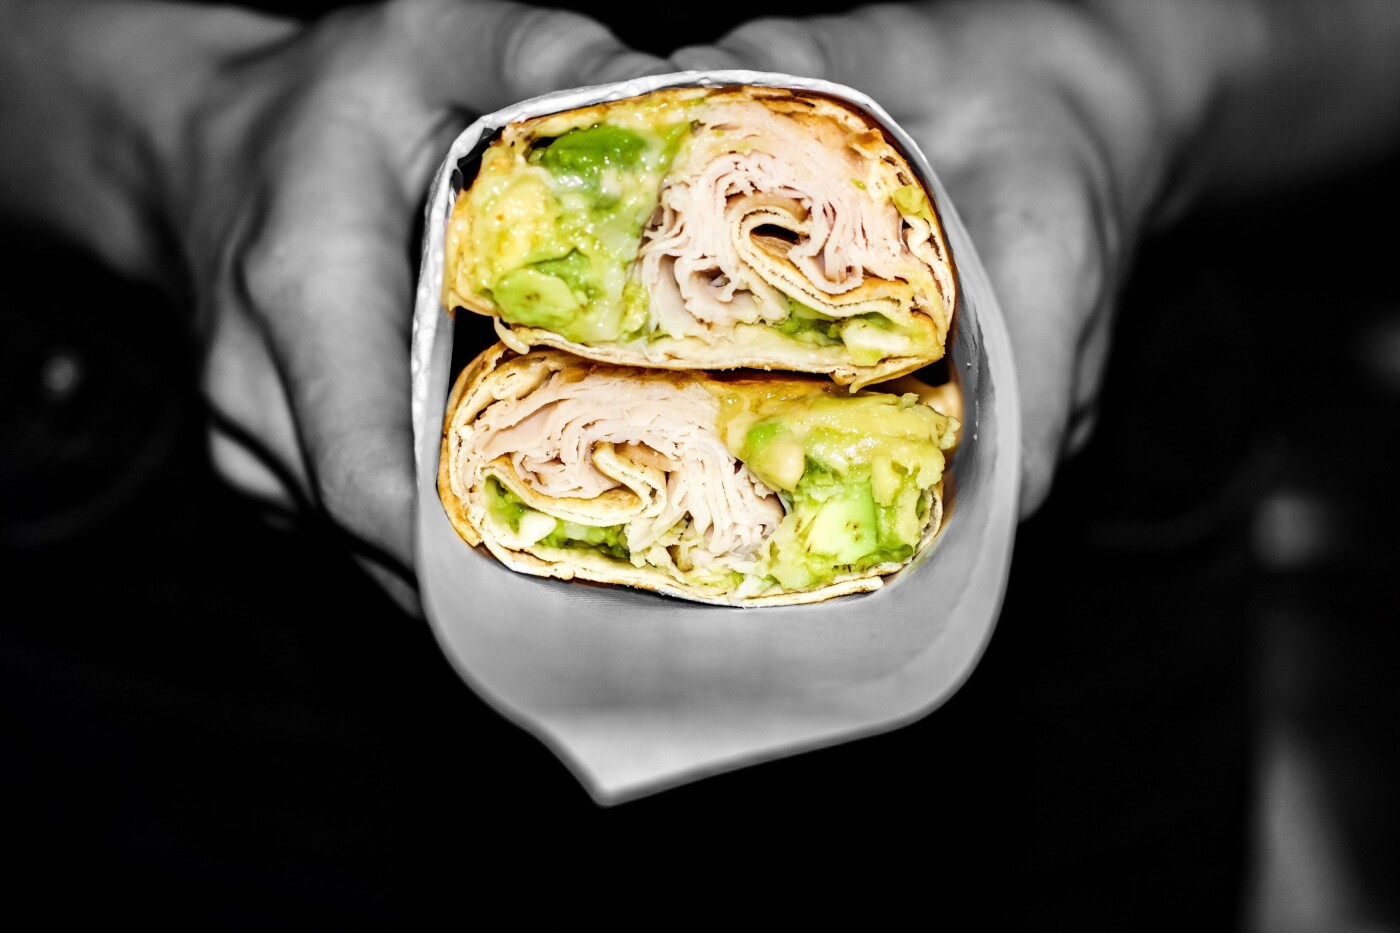 One of the most important elements of enjoying food is knowing that it looks so tasty. This turkey and avocado wrap represents the simple combination of ingredients that are required to make a delicious snack, and the black and white contrasting effect on the image only emphasises the bright colour of this summery food. Its great to remember that a healthier option can look and taste yummy too!<br />
This photograph was taken at our favourite St Andrews lunch venue Blackhorn, who specialise in creating beautiful handmade burgers, wraps and salads using only fresh and local produce.